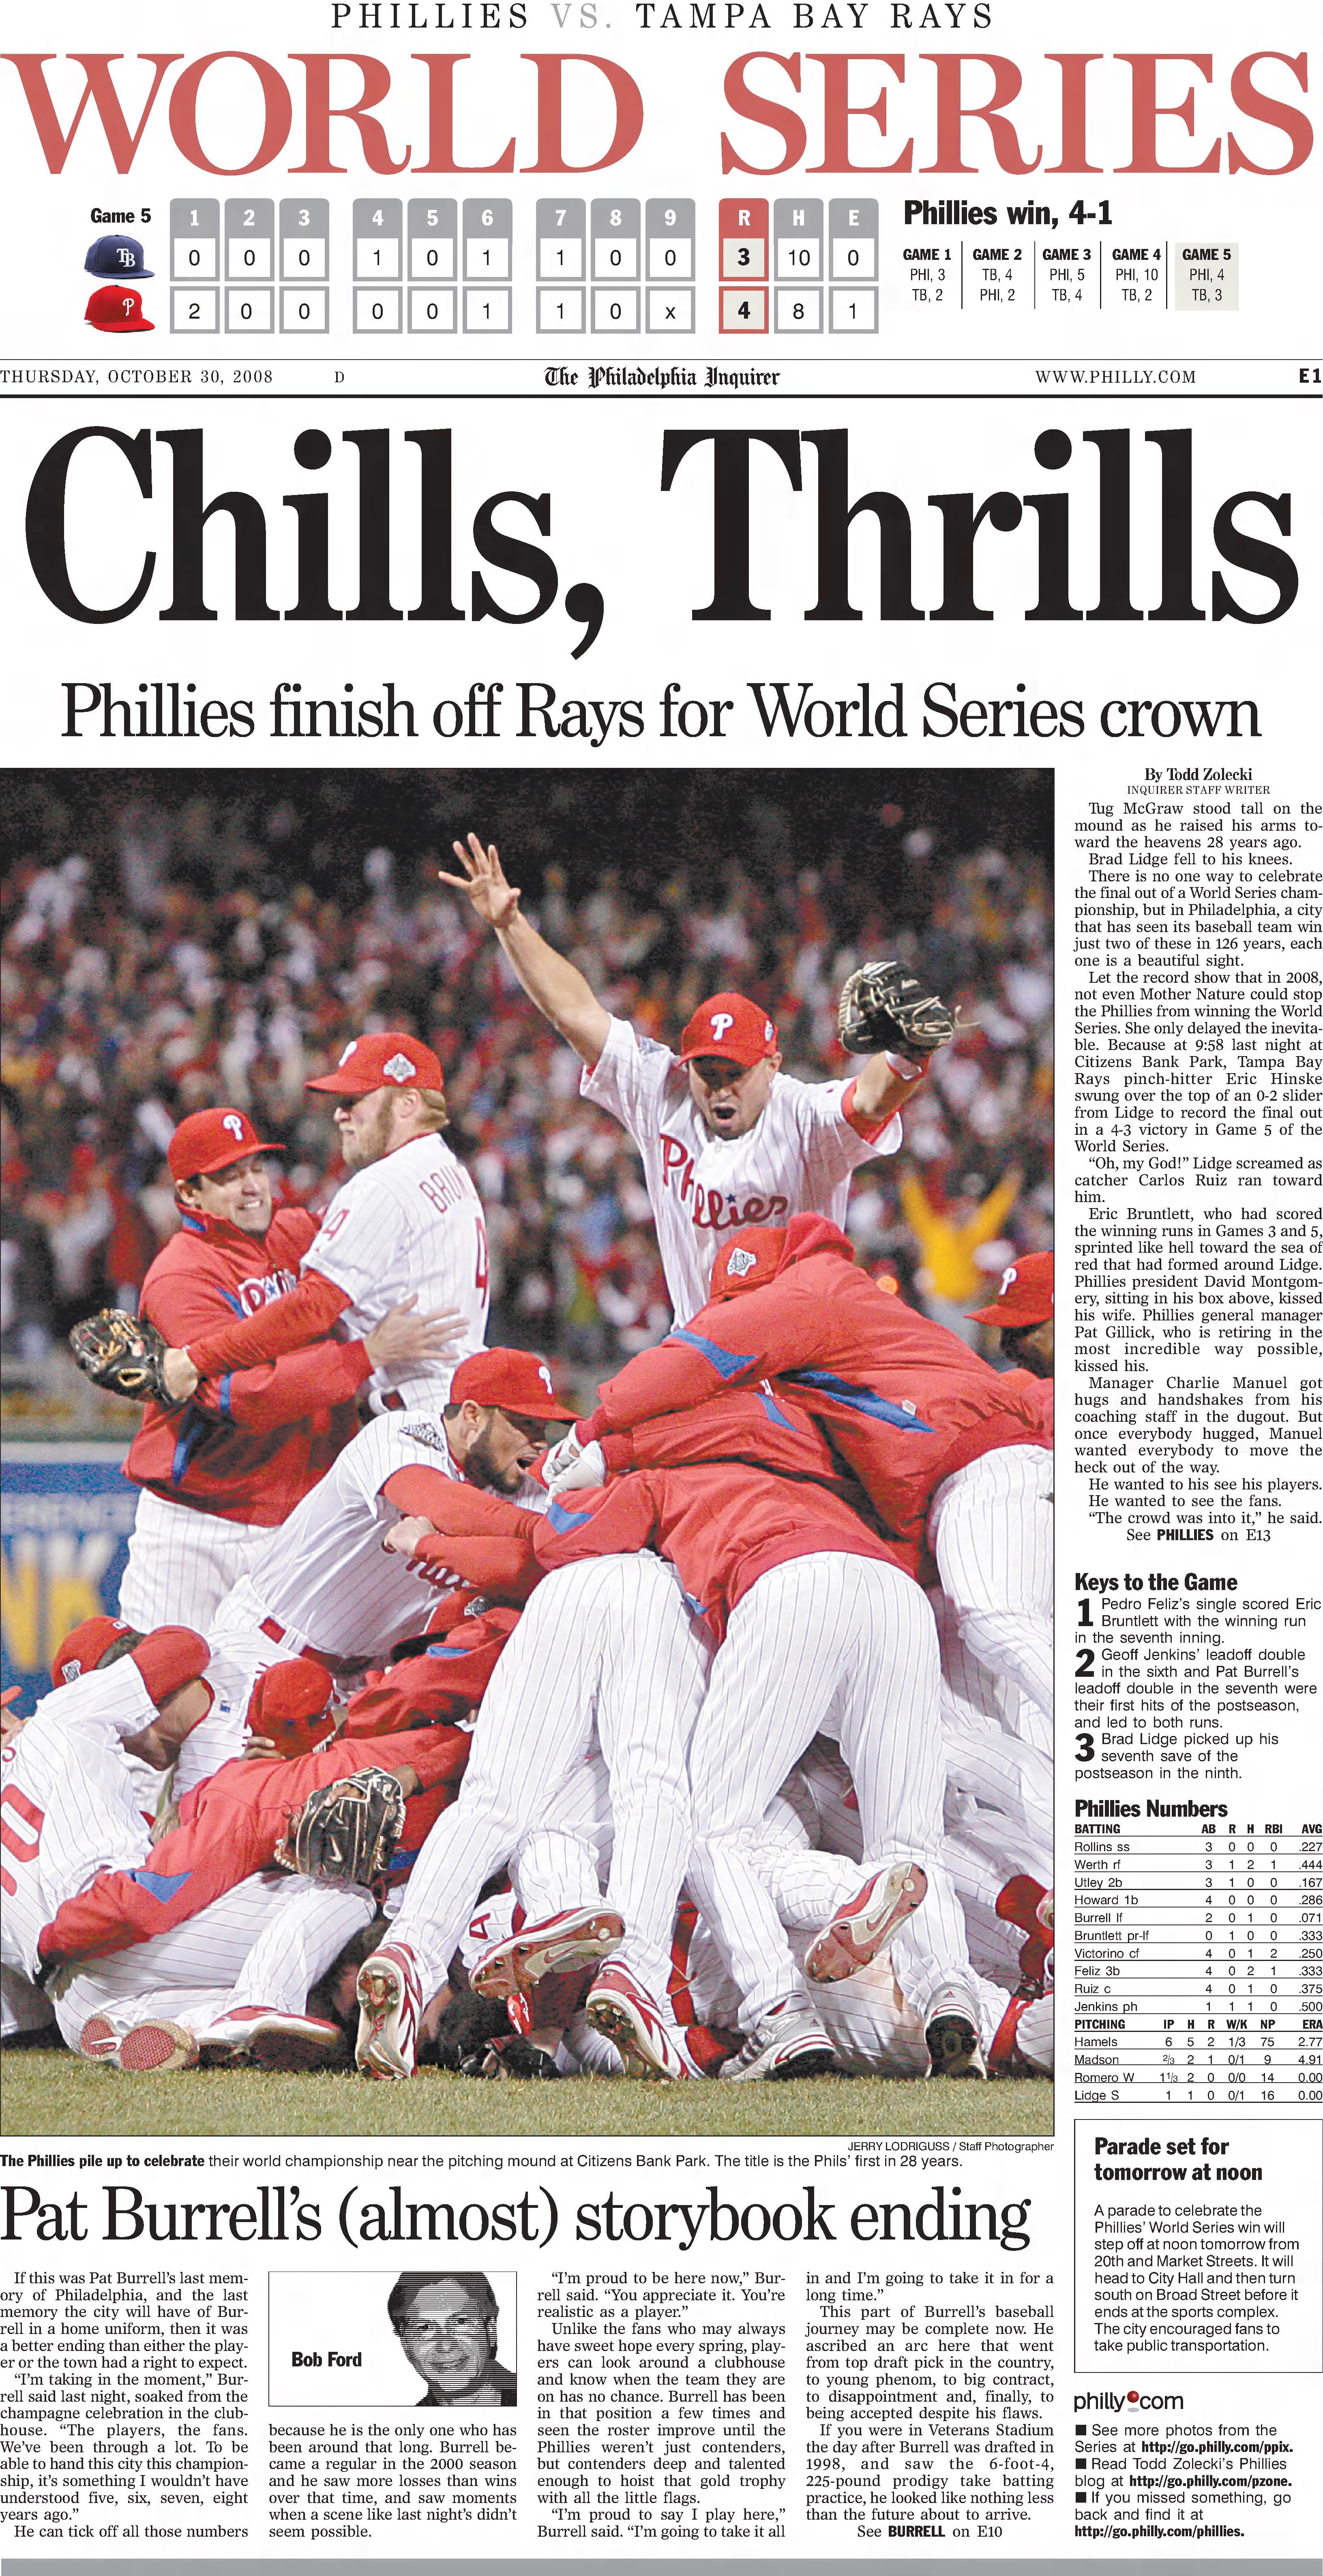 The Phillies' 2008 World Series championship: Tell us what you